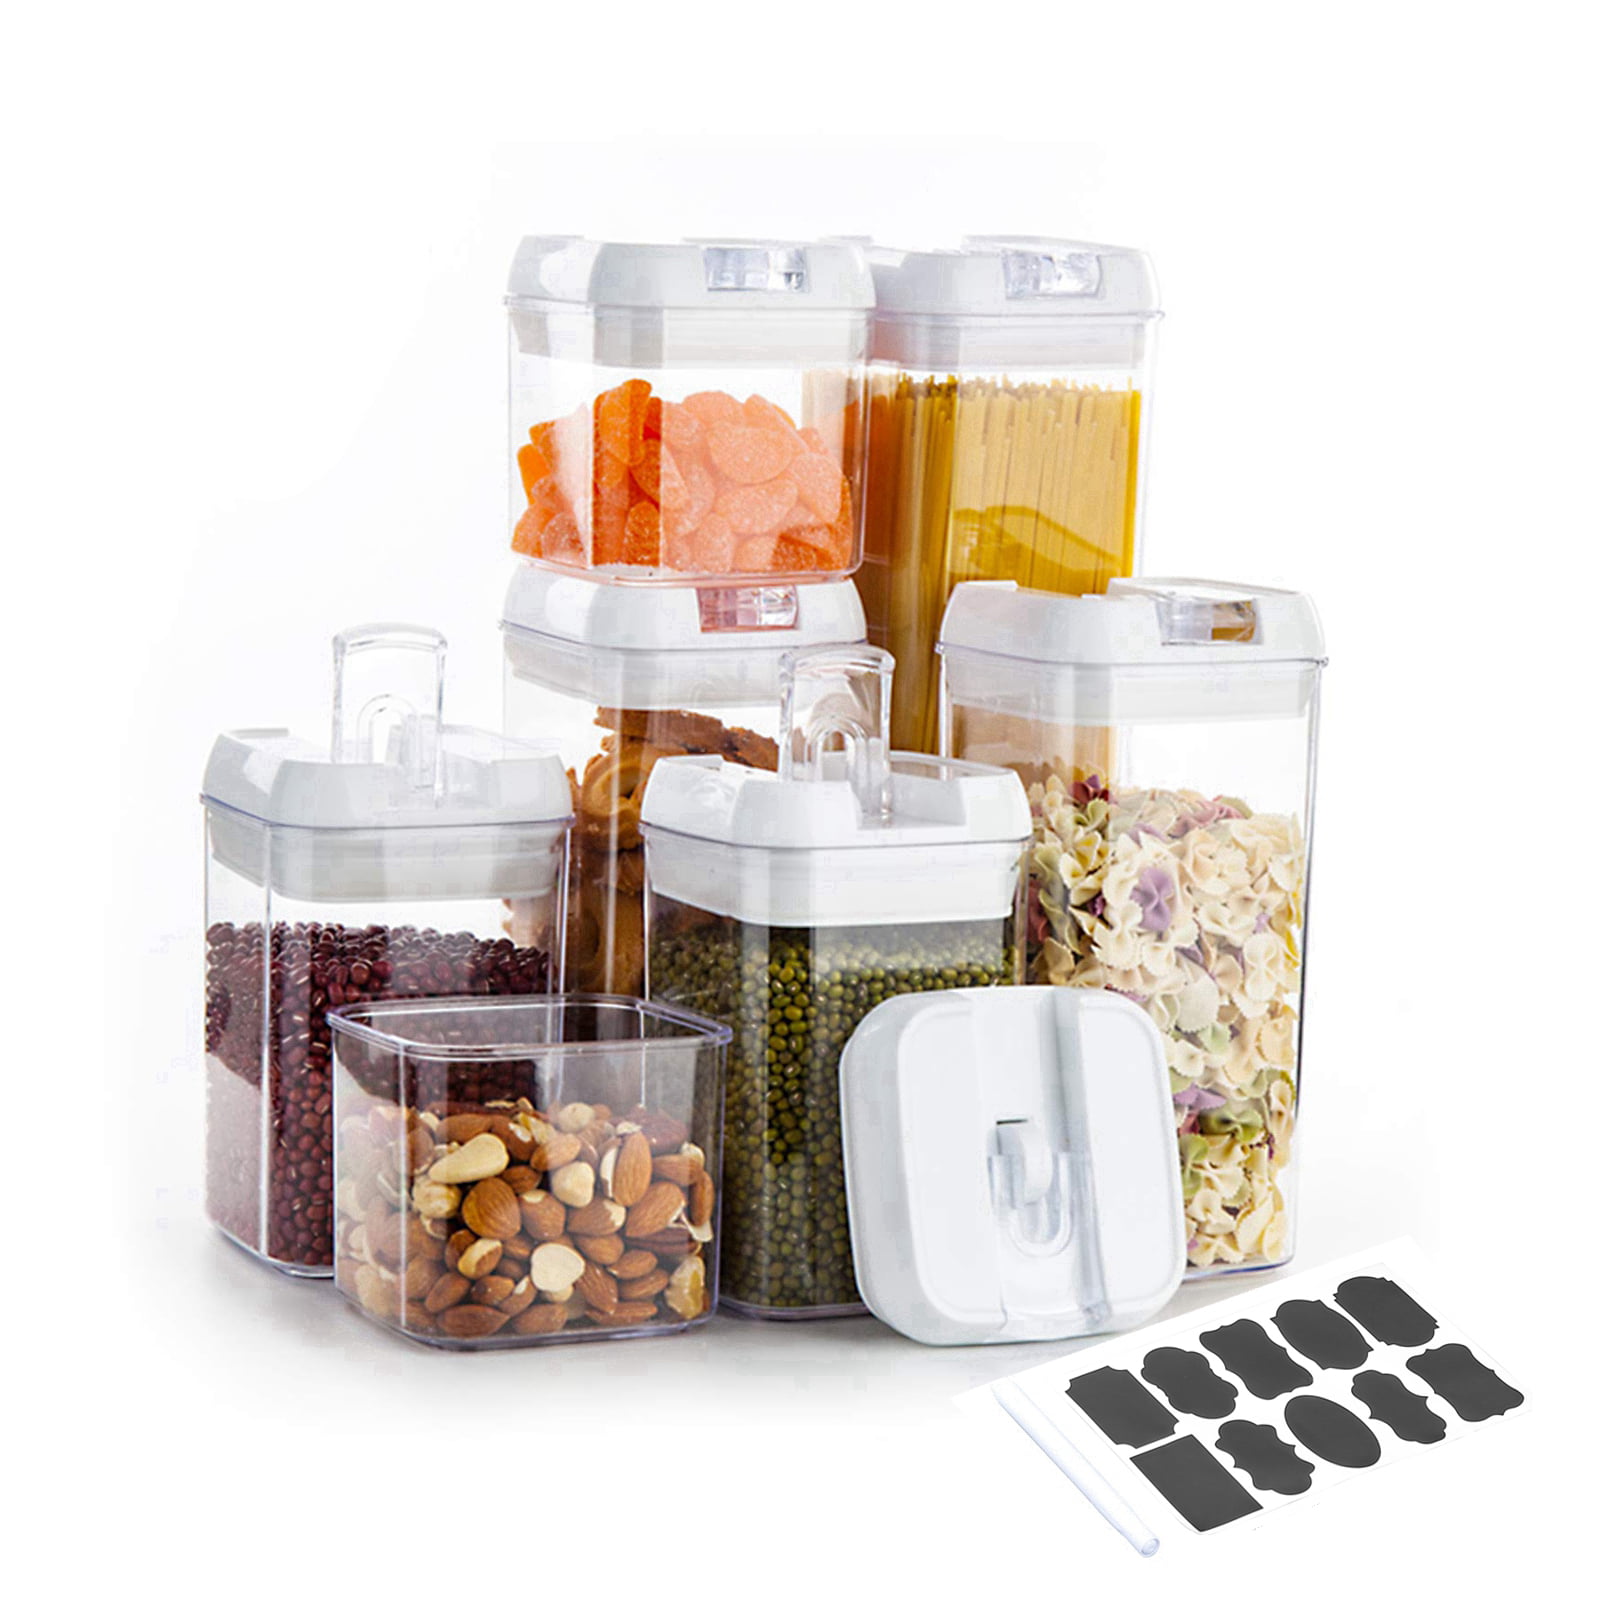 OMNISAFE Airtight Food Storage Container Set, 7pcs Kitchen & Pantry Organization Containers, BPA Free Clear Plastic Canisters for Cereal, Sugar 